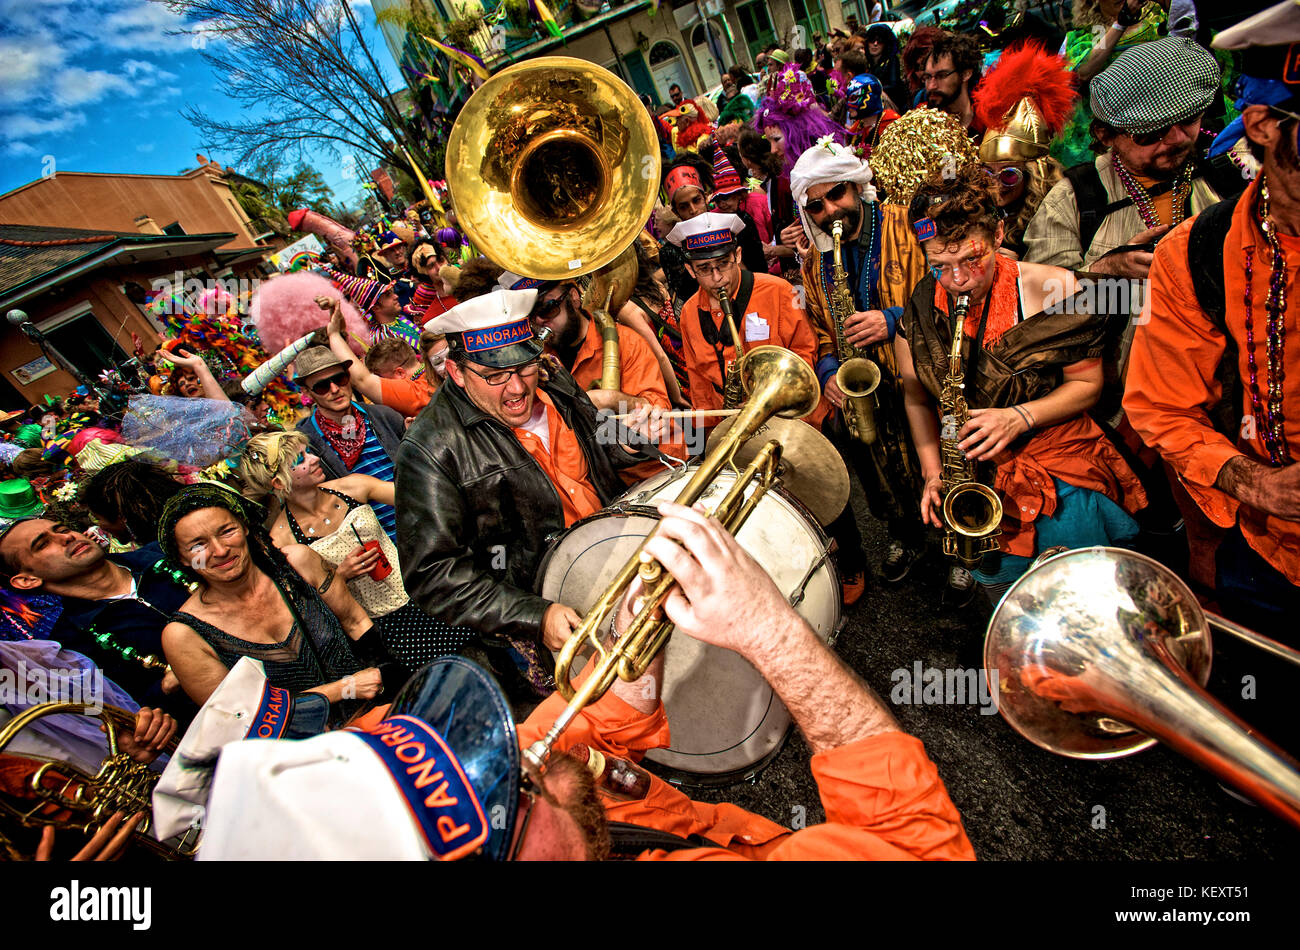 The Panorama Brass Band leads a second line parade on Mardi Gras Day in New Orleans, Louisiana Stock Photo